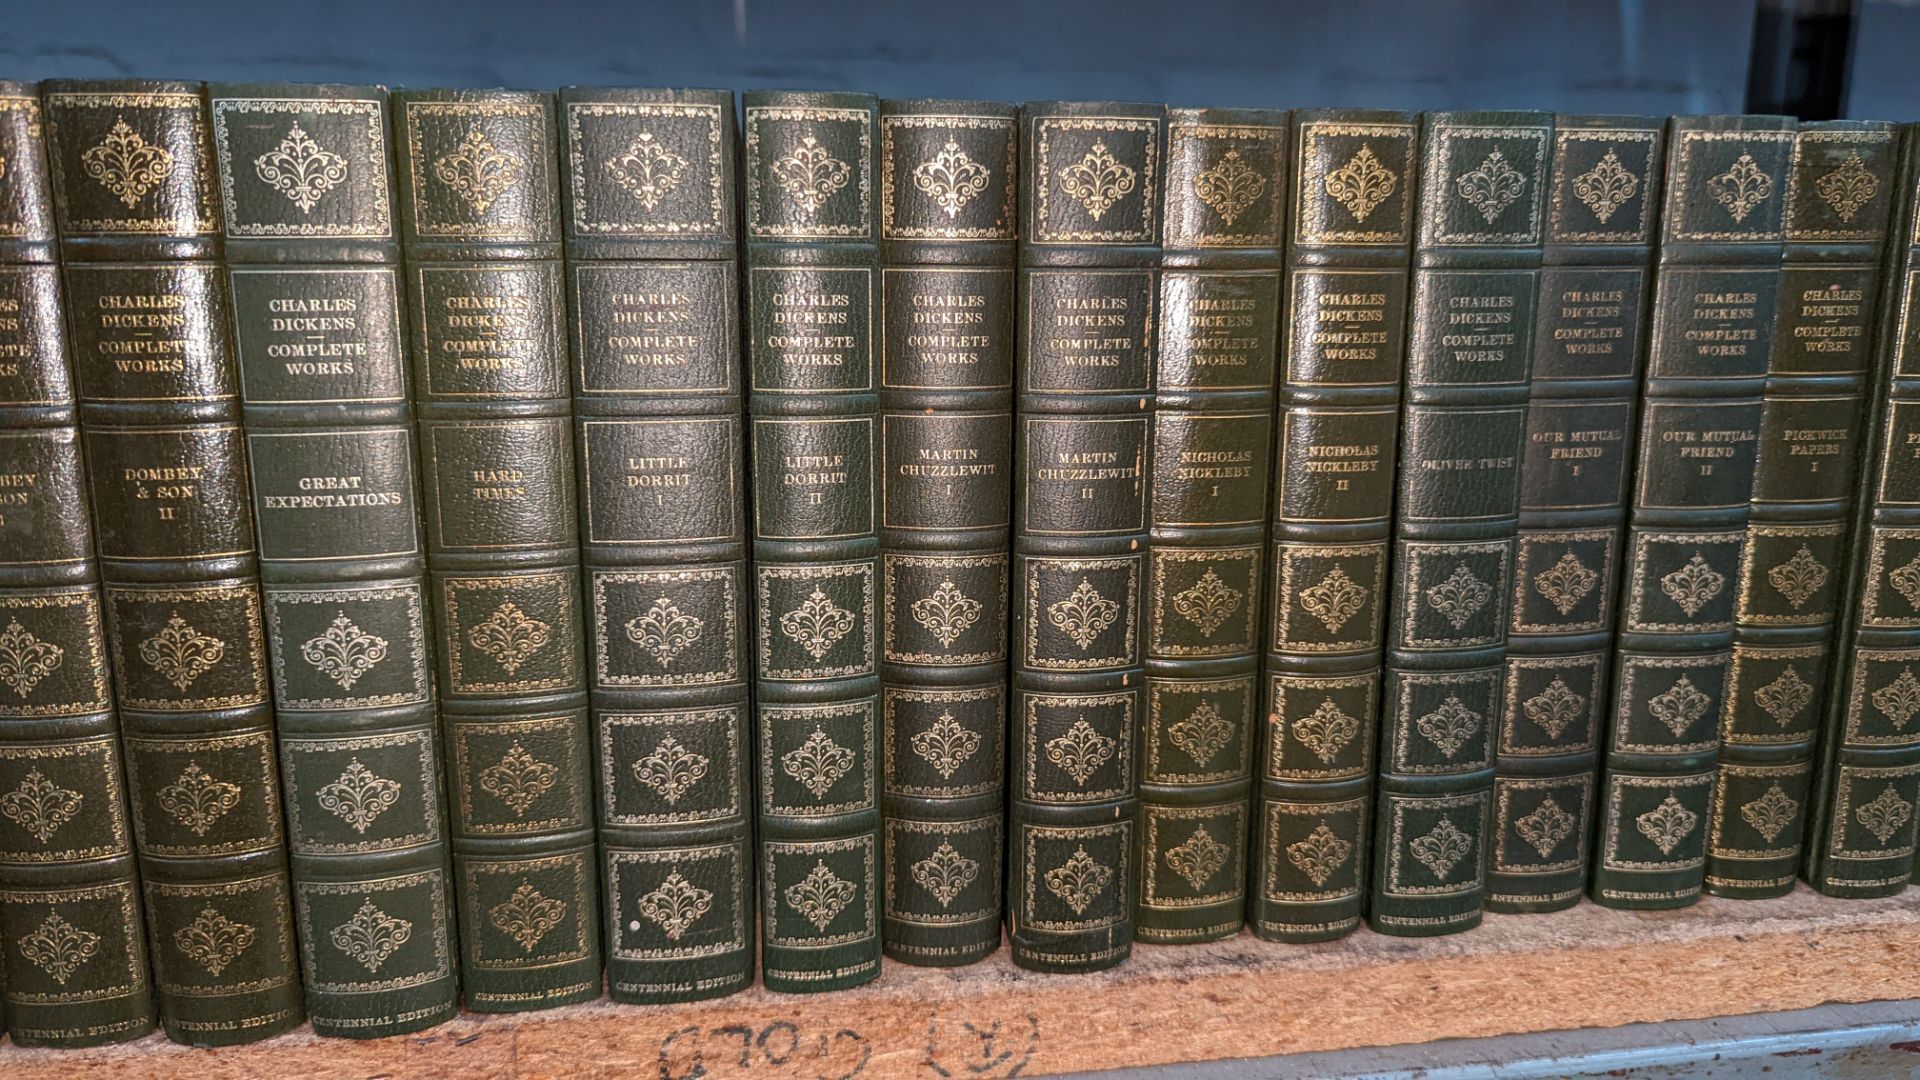 Charles Dickens Complete Works Centennial Edition - this lot comprises 32 books in total. We believ - Image 6 of 8